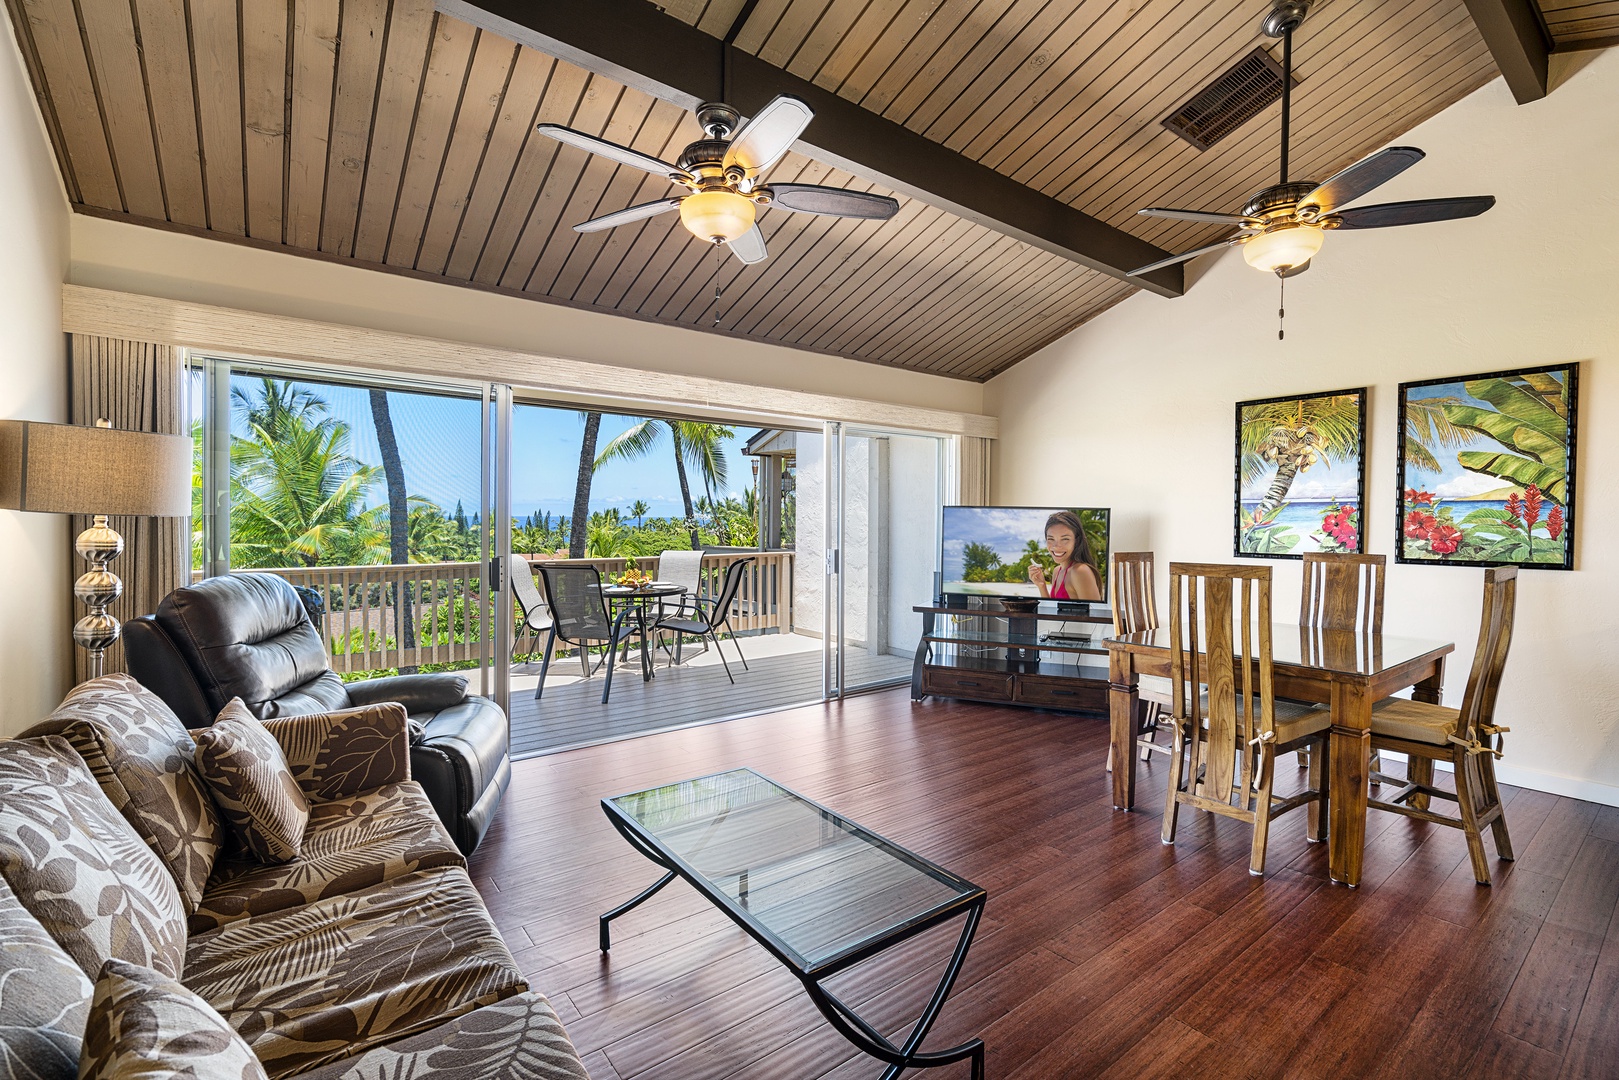 Kailua Kona Vacation Rentals, Keauhou Resort 113 - Watch the ocean from the couch!